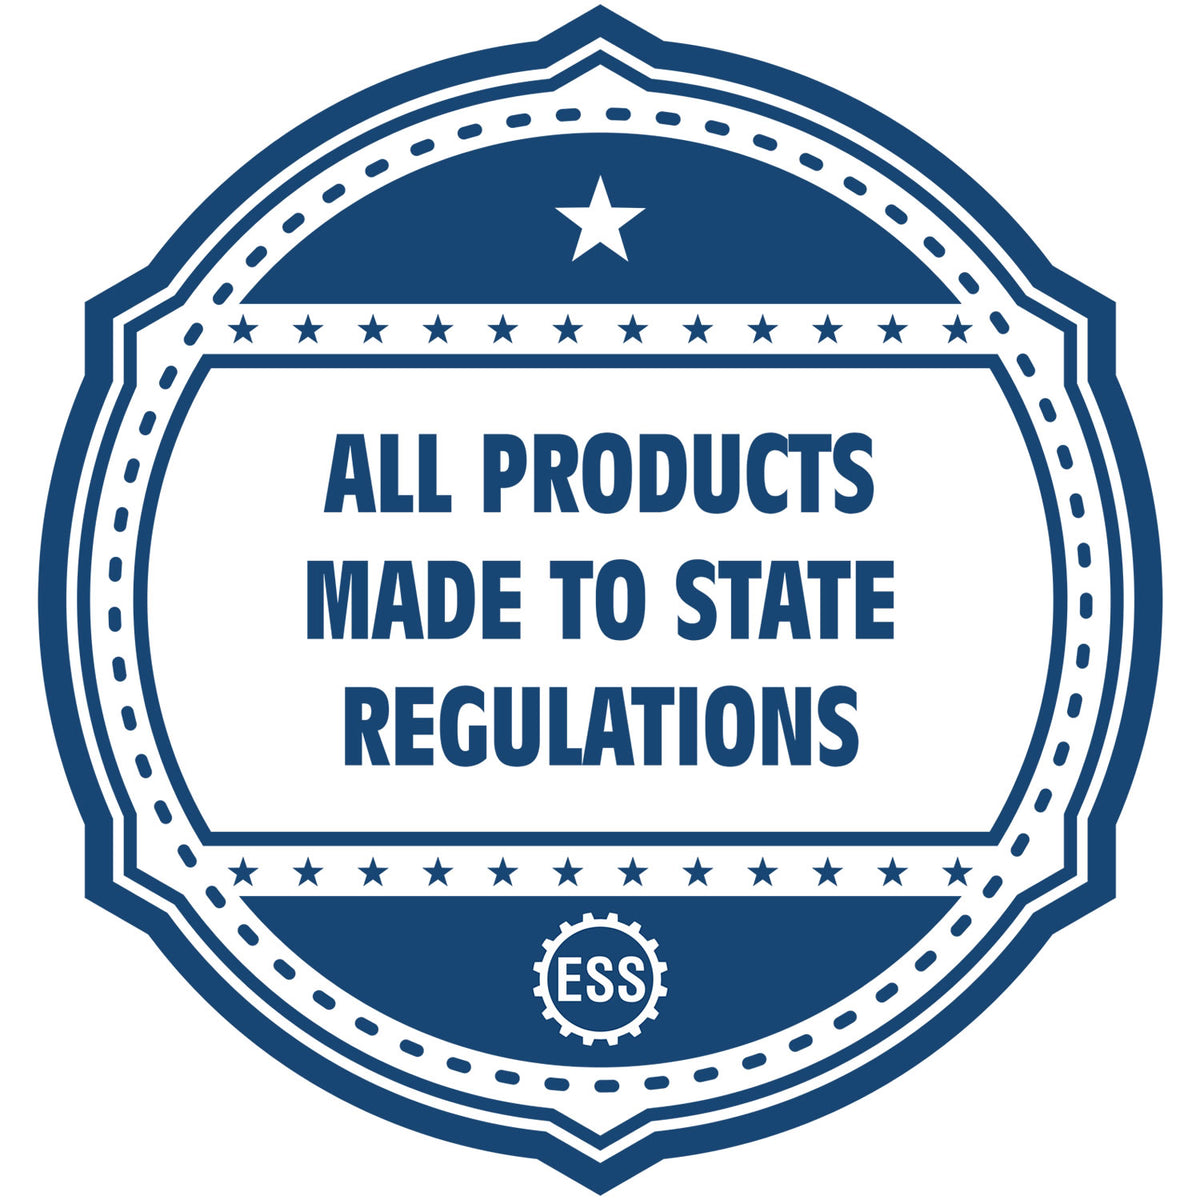 An icon or badge element for the PSI Ohio Notary Stamp showing that this product is made in compliance with state regulations.